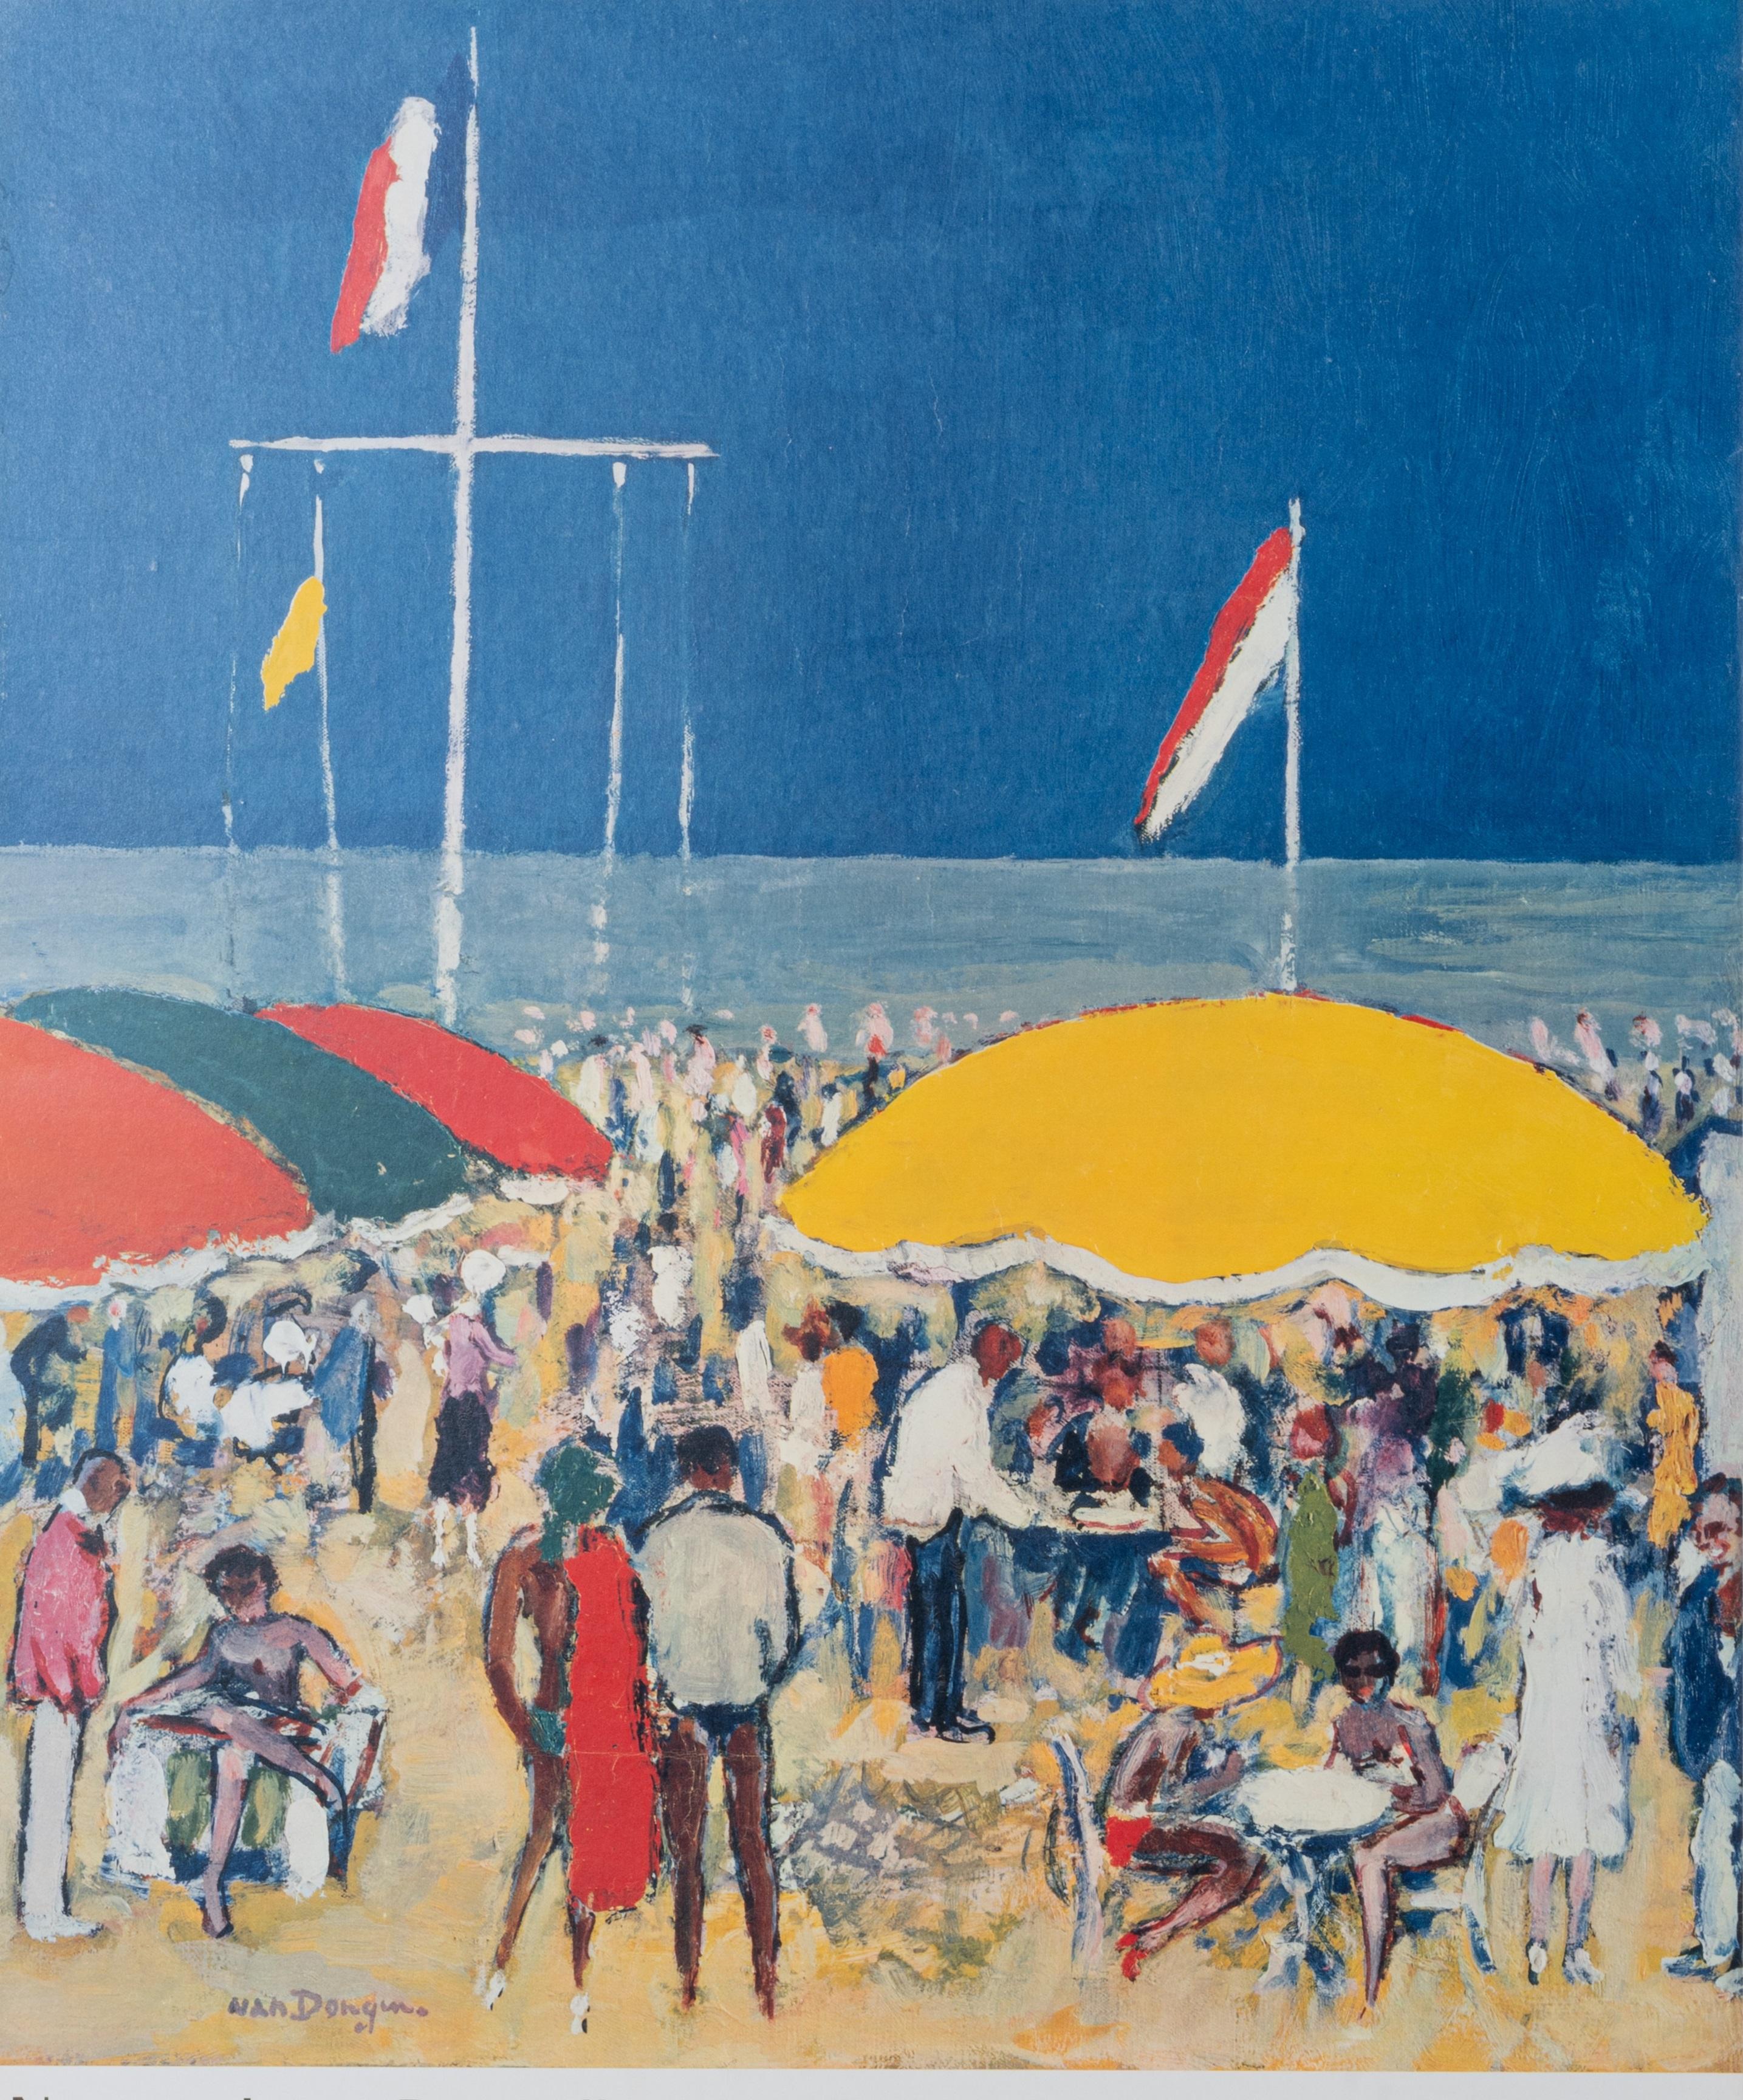 Advertising poster created in 1960 to promote tourism in Normandy.

Artist: Kees Van Dongen
Title: Normandie – Deauville – le bar du soleil
Date: 1960
Size: 24.8 x 39.4 in / 63 x 100 cm
Printer : Imp. Braun et Cie, Mulhouse, Paris
Materials and